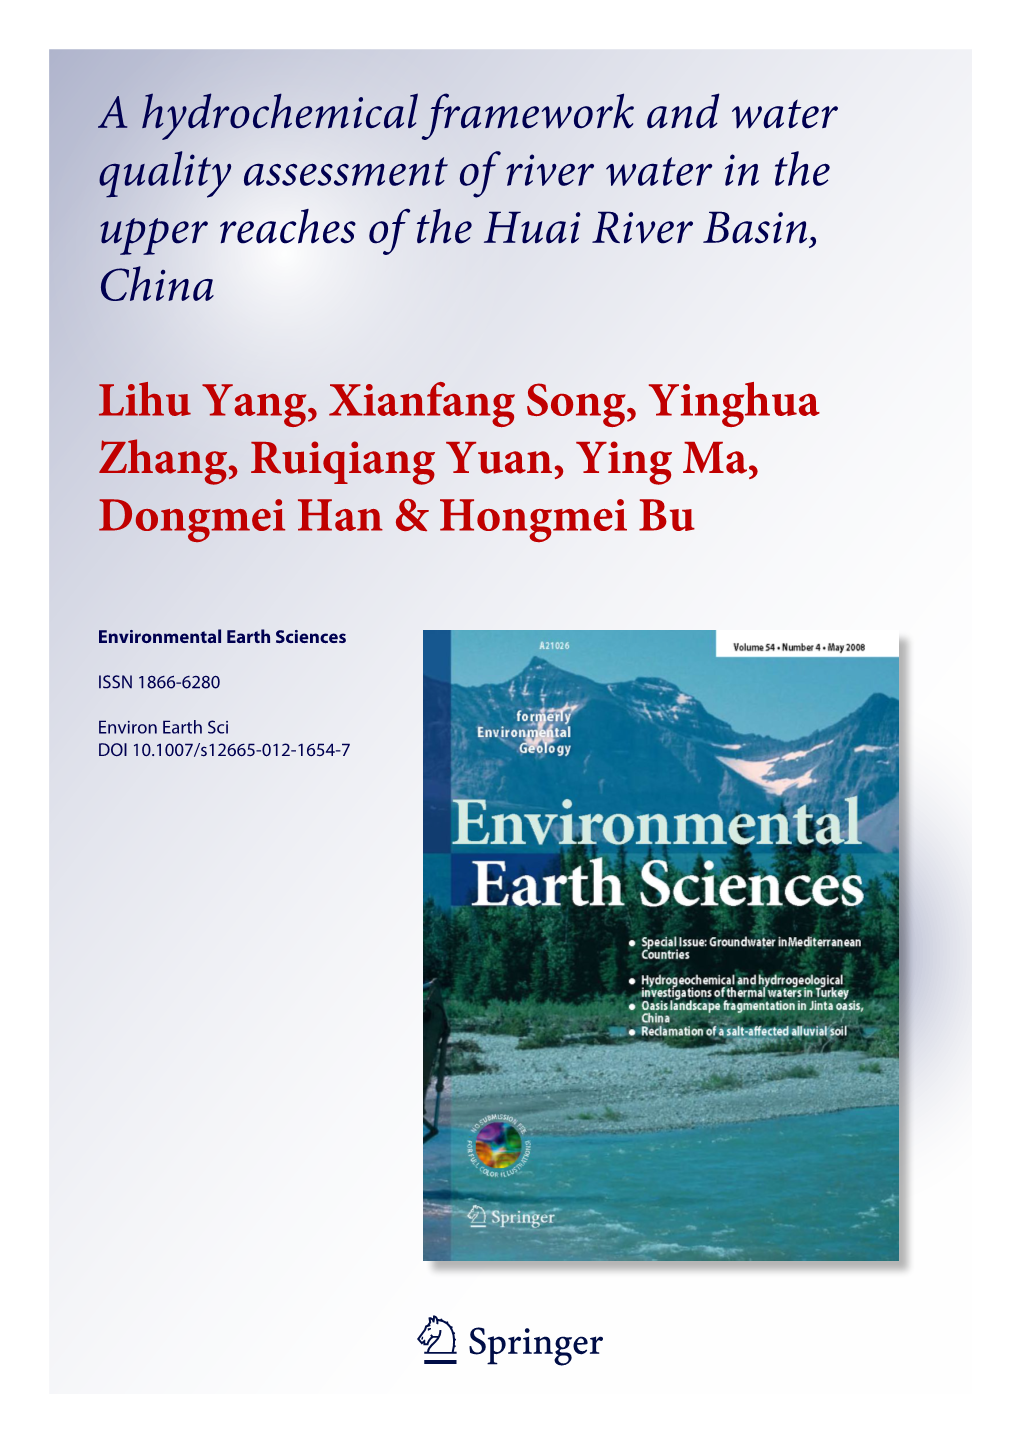 A Hydrochemical Framework and Water Quality Assessment of River Water in the Upper Reaches of the Huai River Basin, China